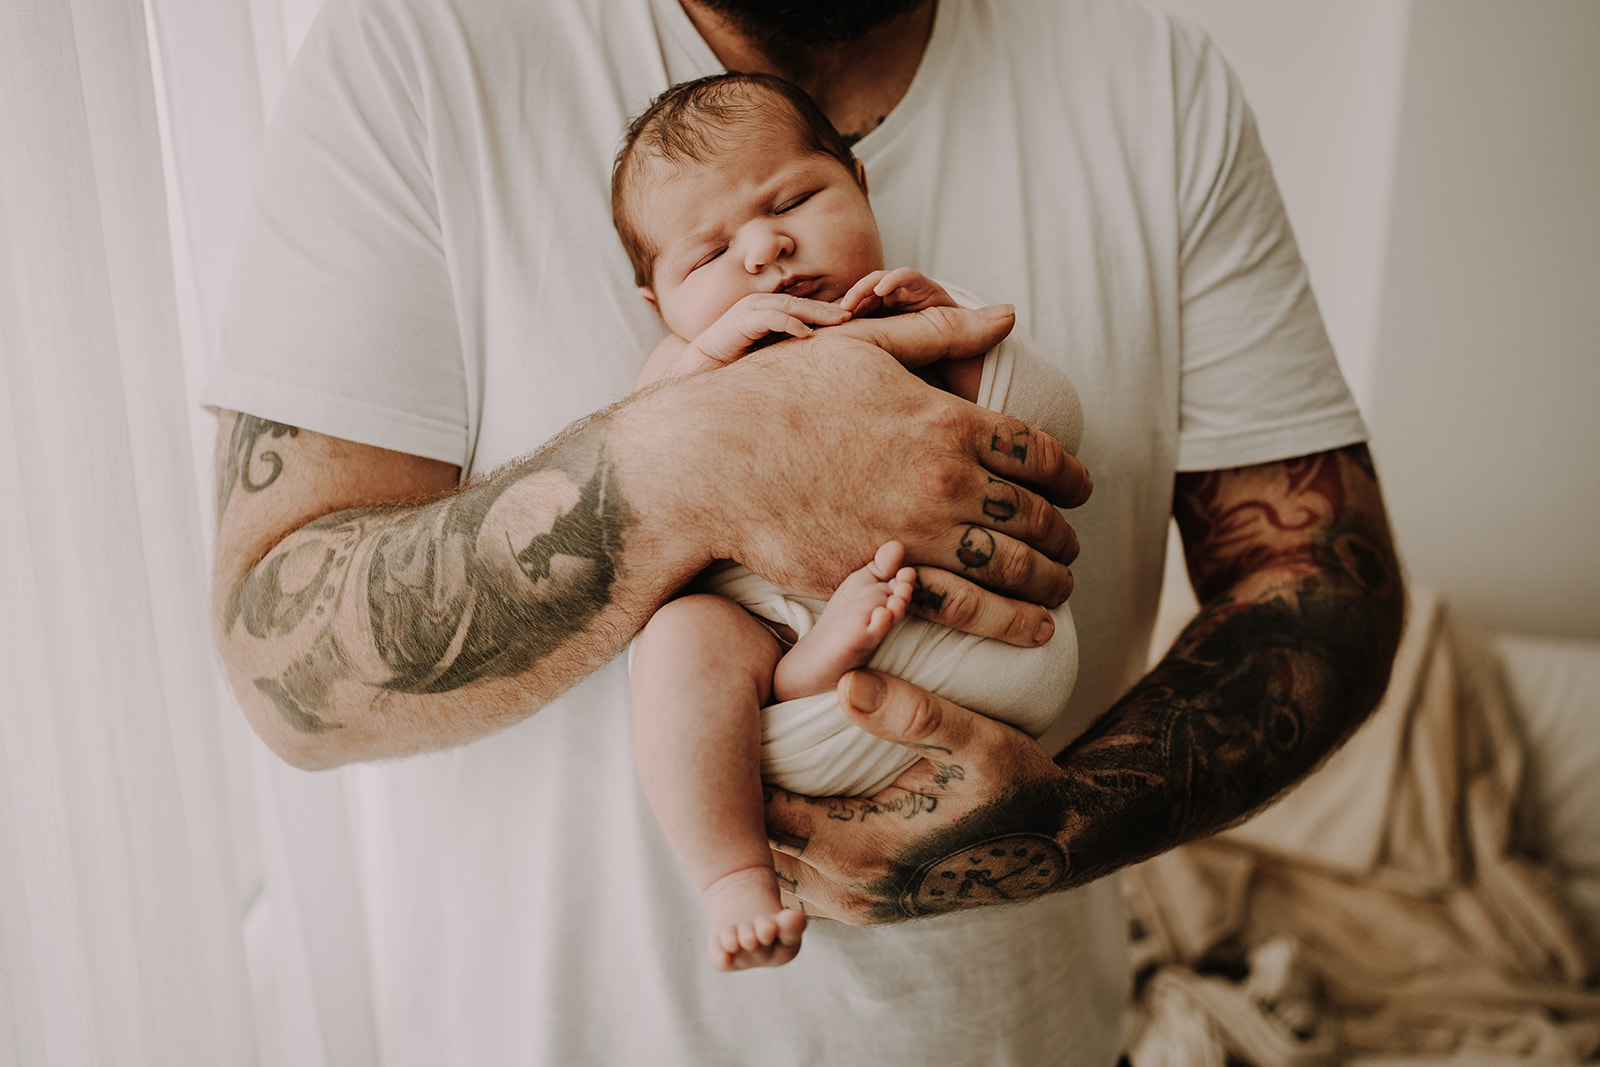 newborn baby being held in arms of tattooed father